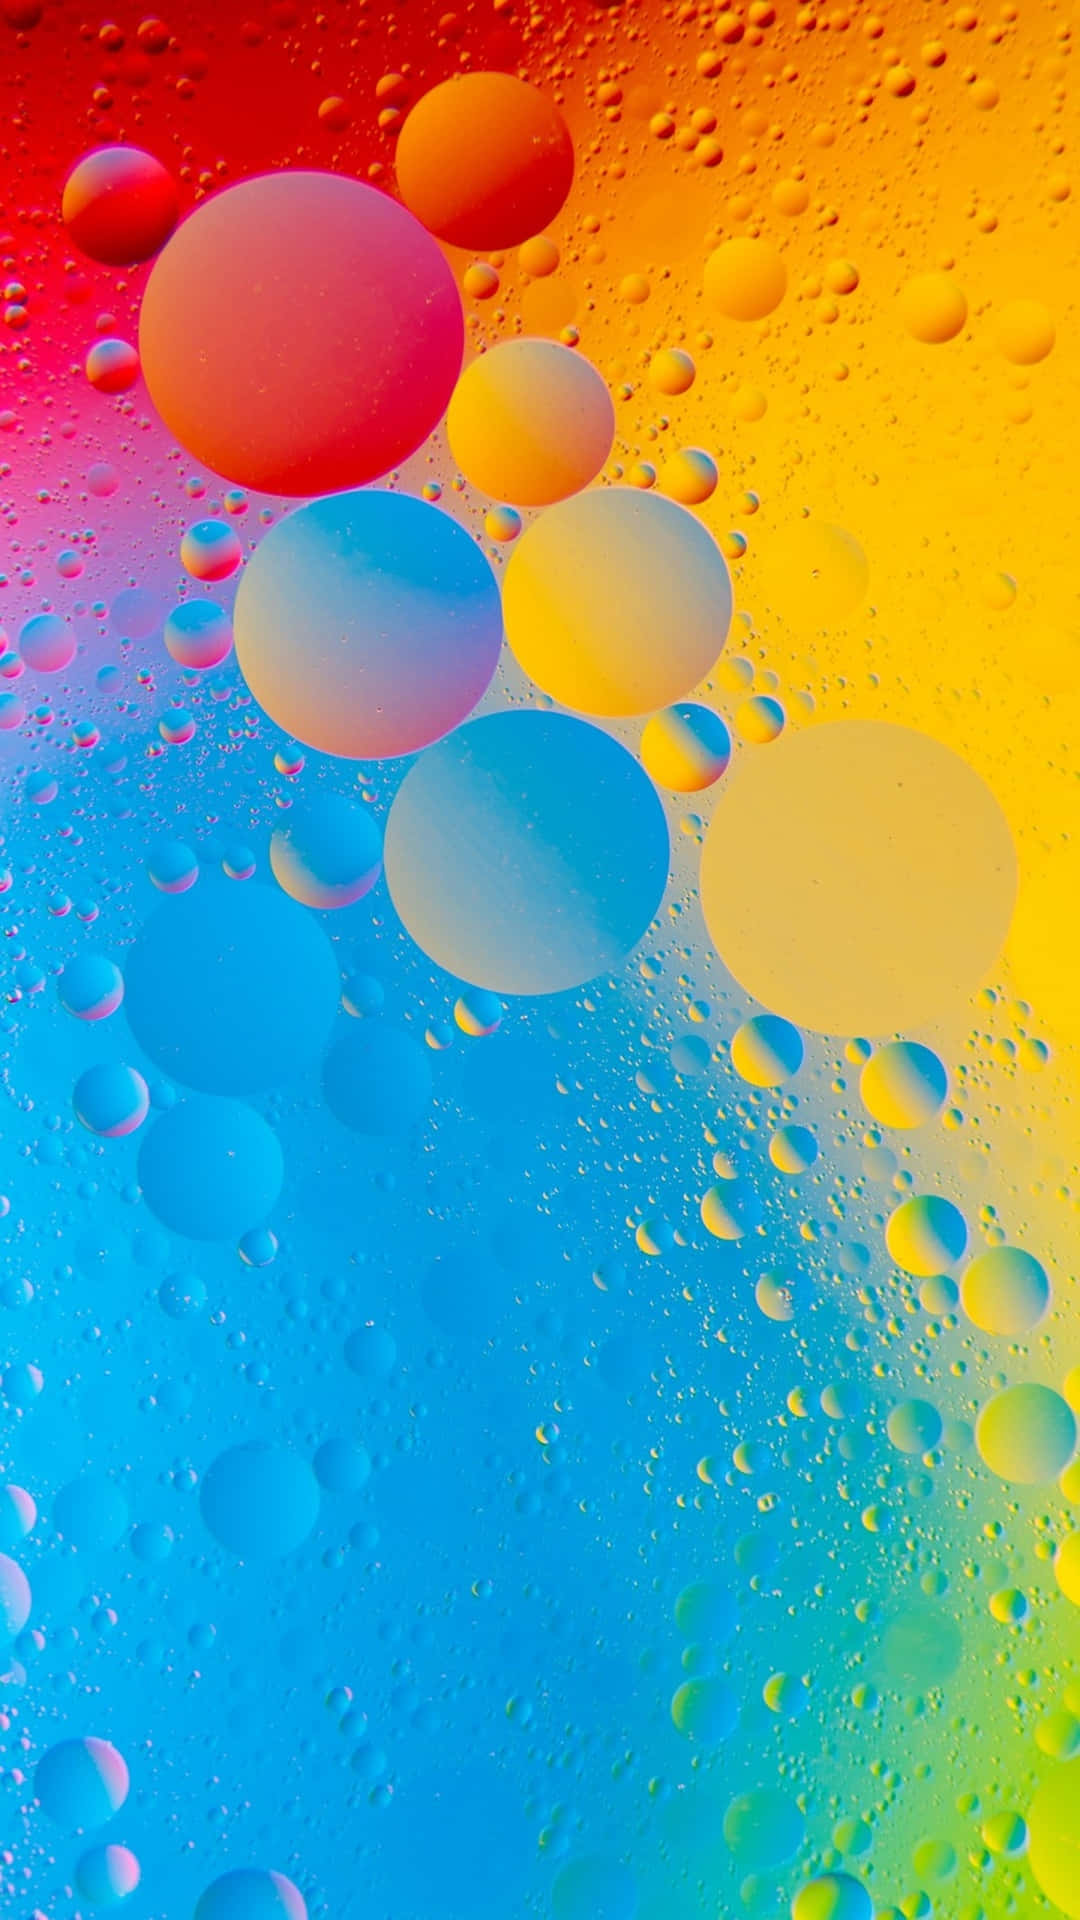 Magnificent View Of Colorful 4k Water Droplet Abstract Art For Phone